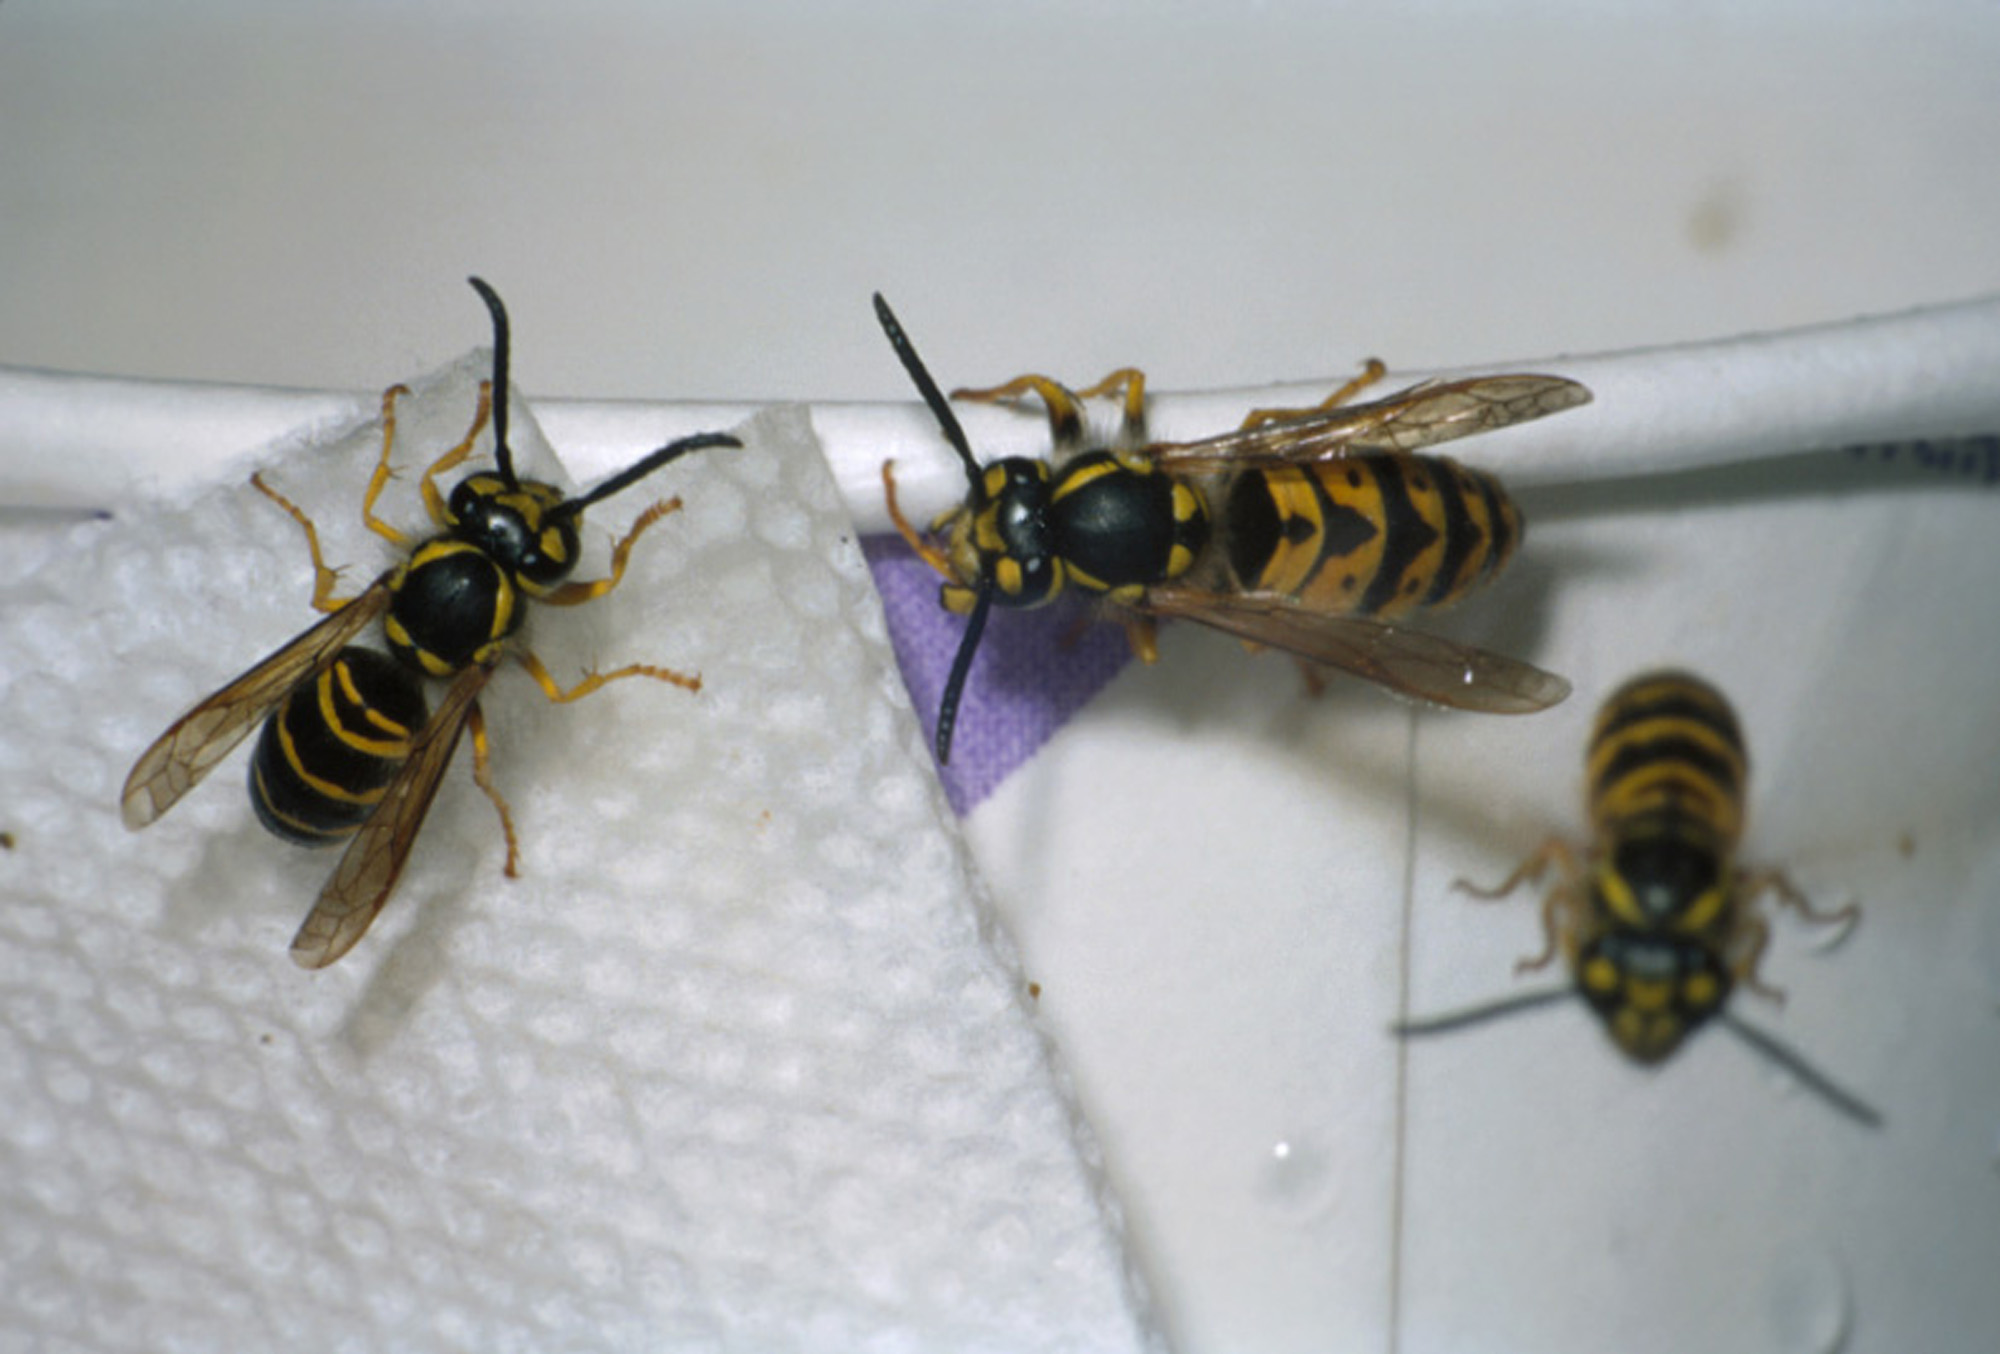 Social wasps and bees in the Upper Midwest : Insects : University of ...